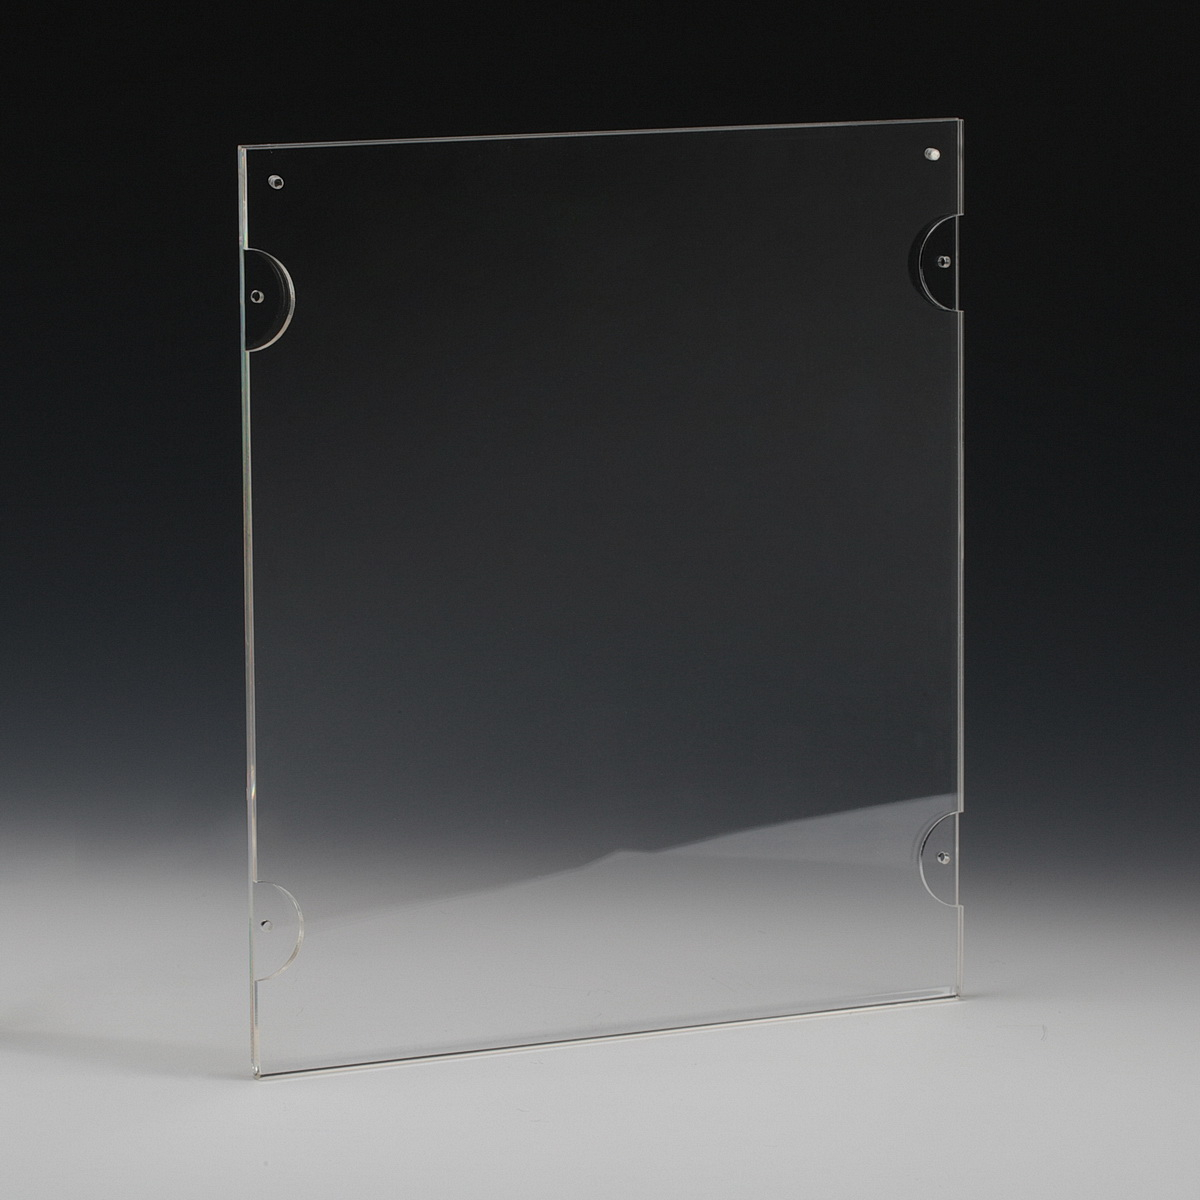 Clear Acrylic Sign Holder Kit for Media 5 x 8.5'' x 11''